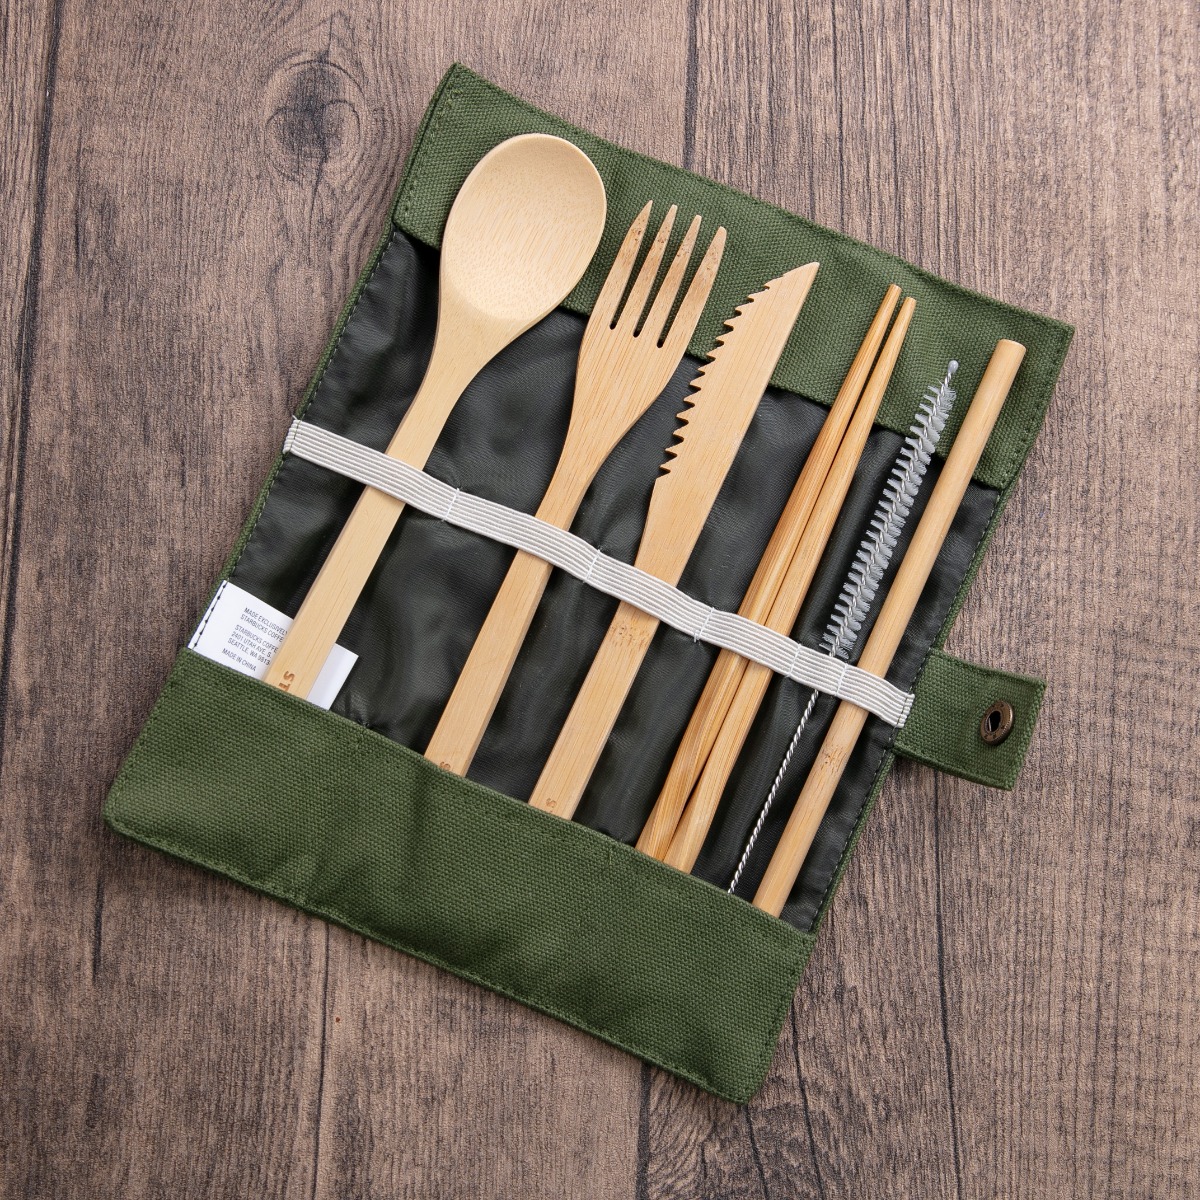 Starbucks Cutlery Set with carry pouch